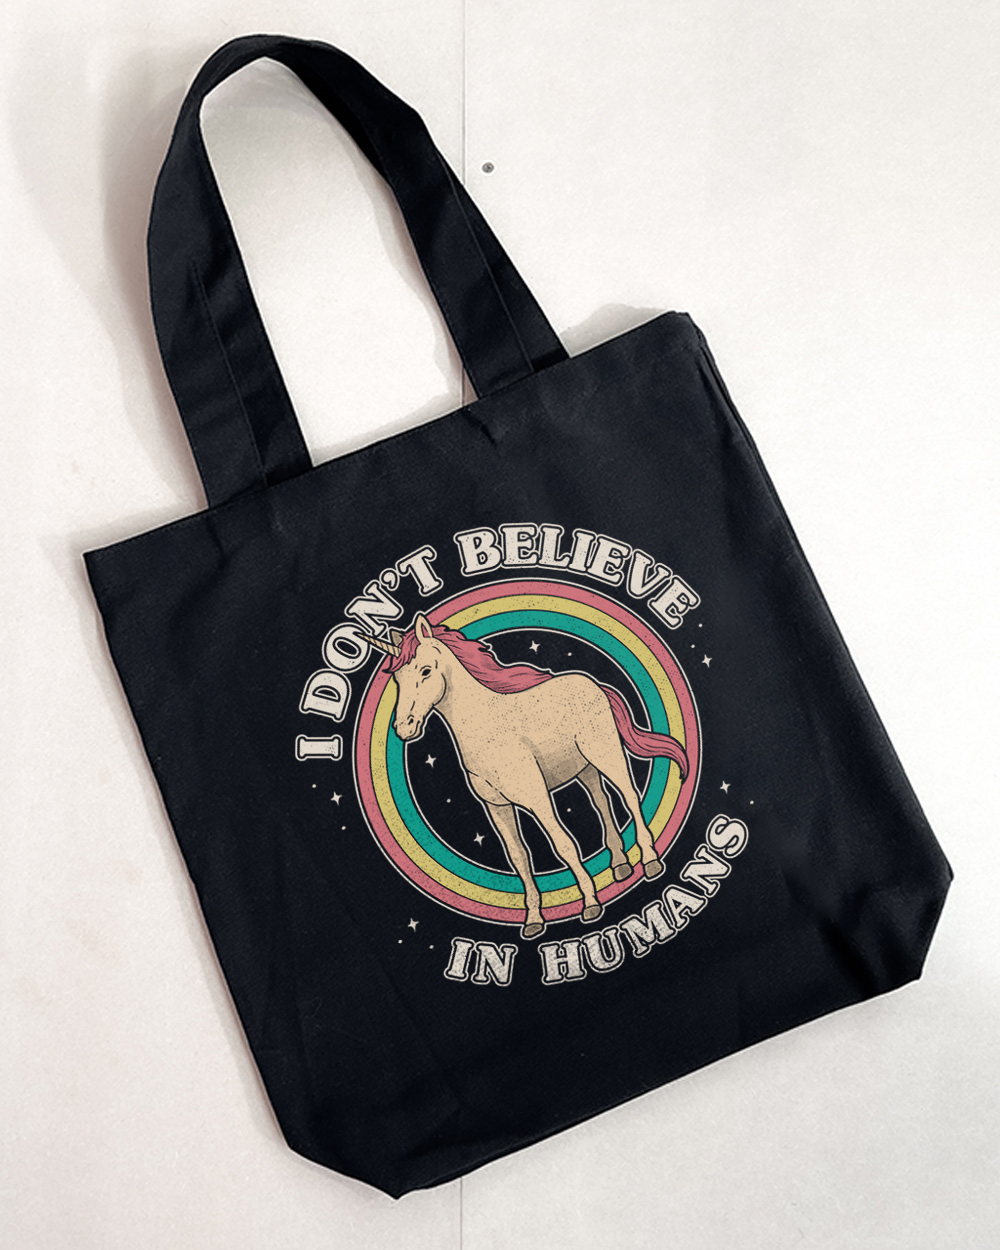 I Don't Believe In Humans Tote Bag Black